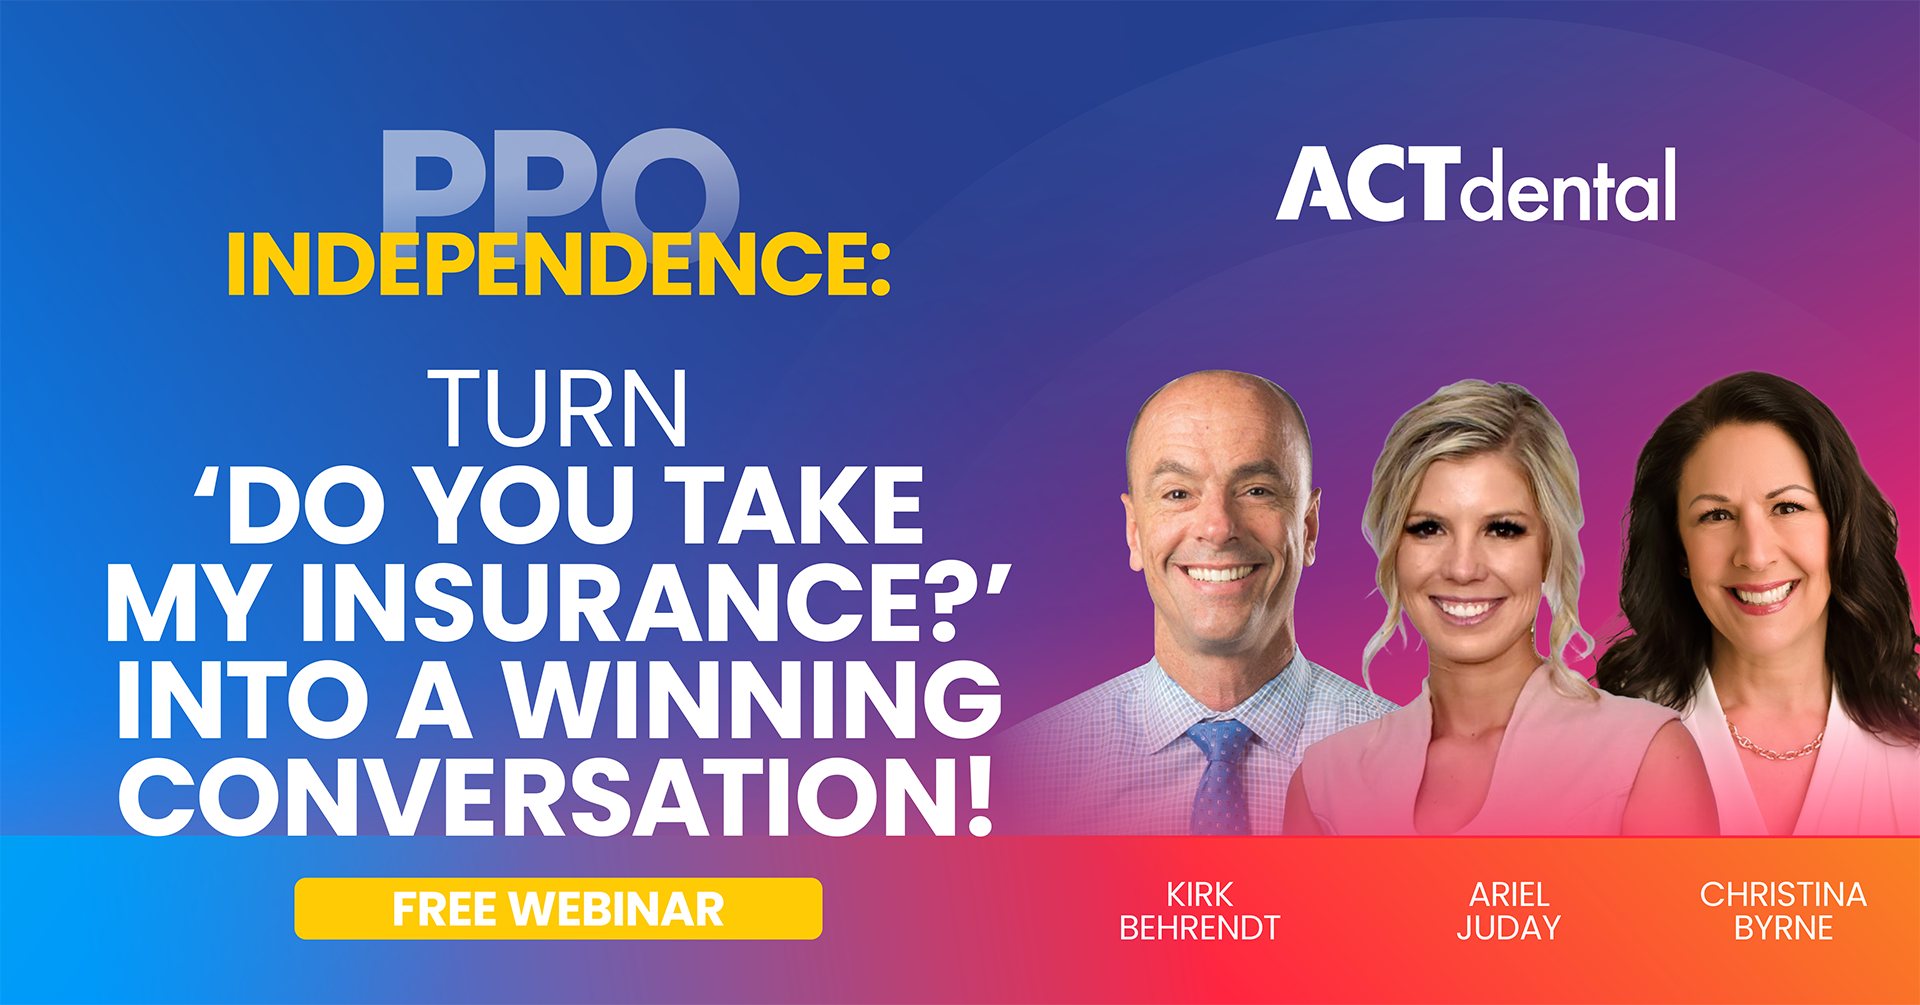 01 Free Webinar - PPO Independence - 1200x628 Facebook-4